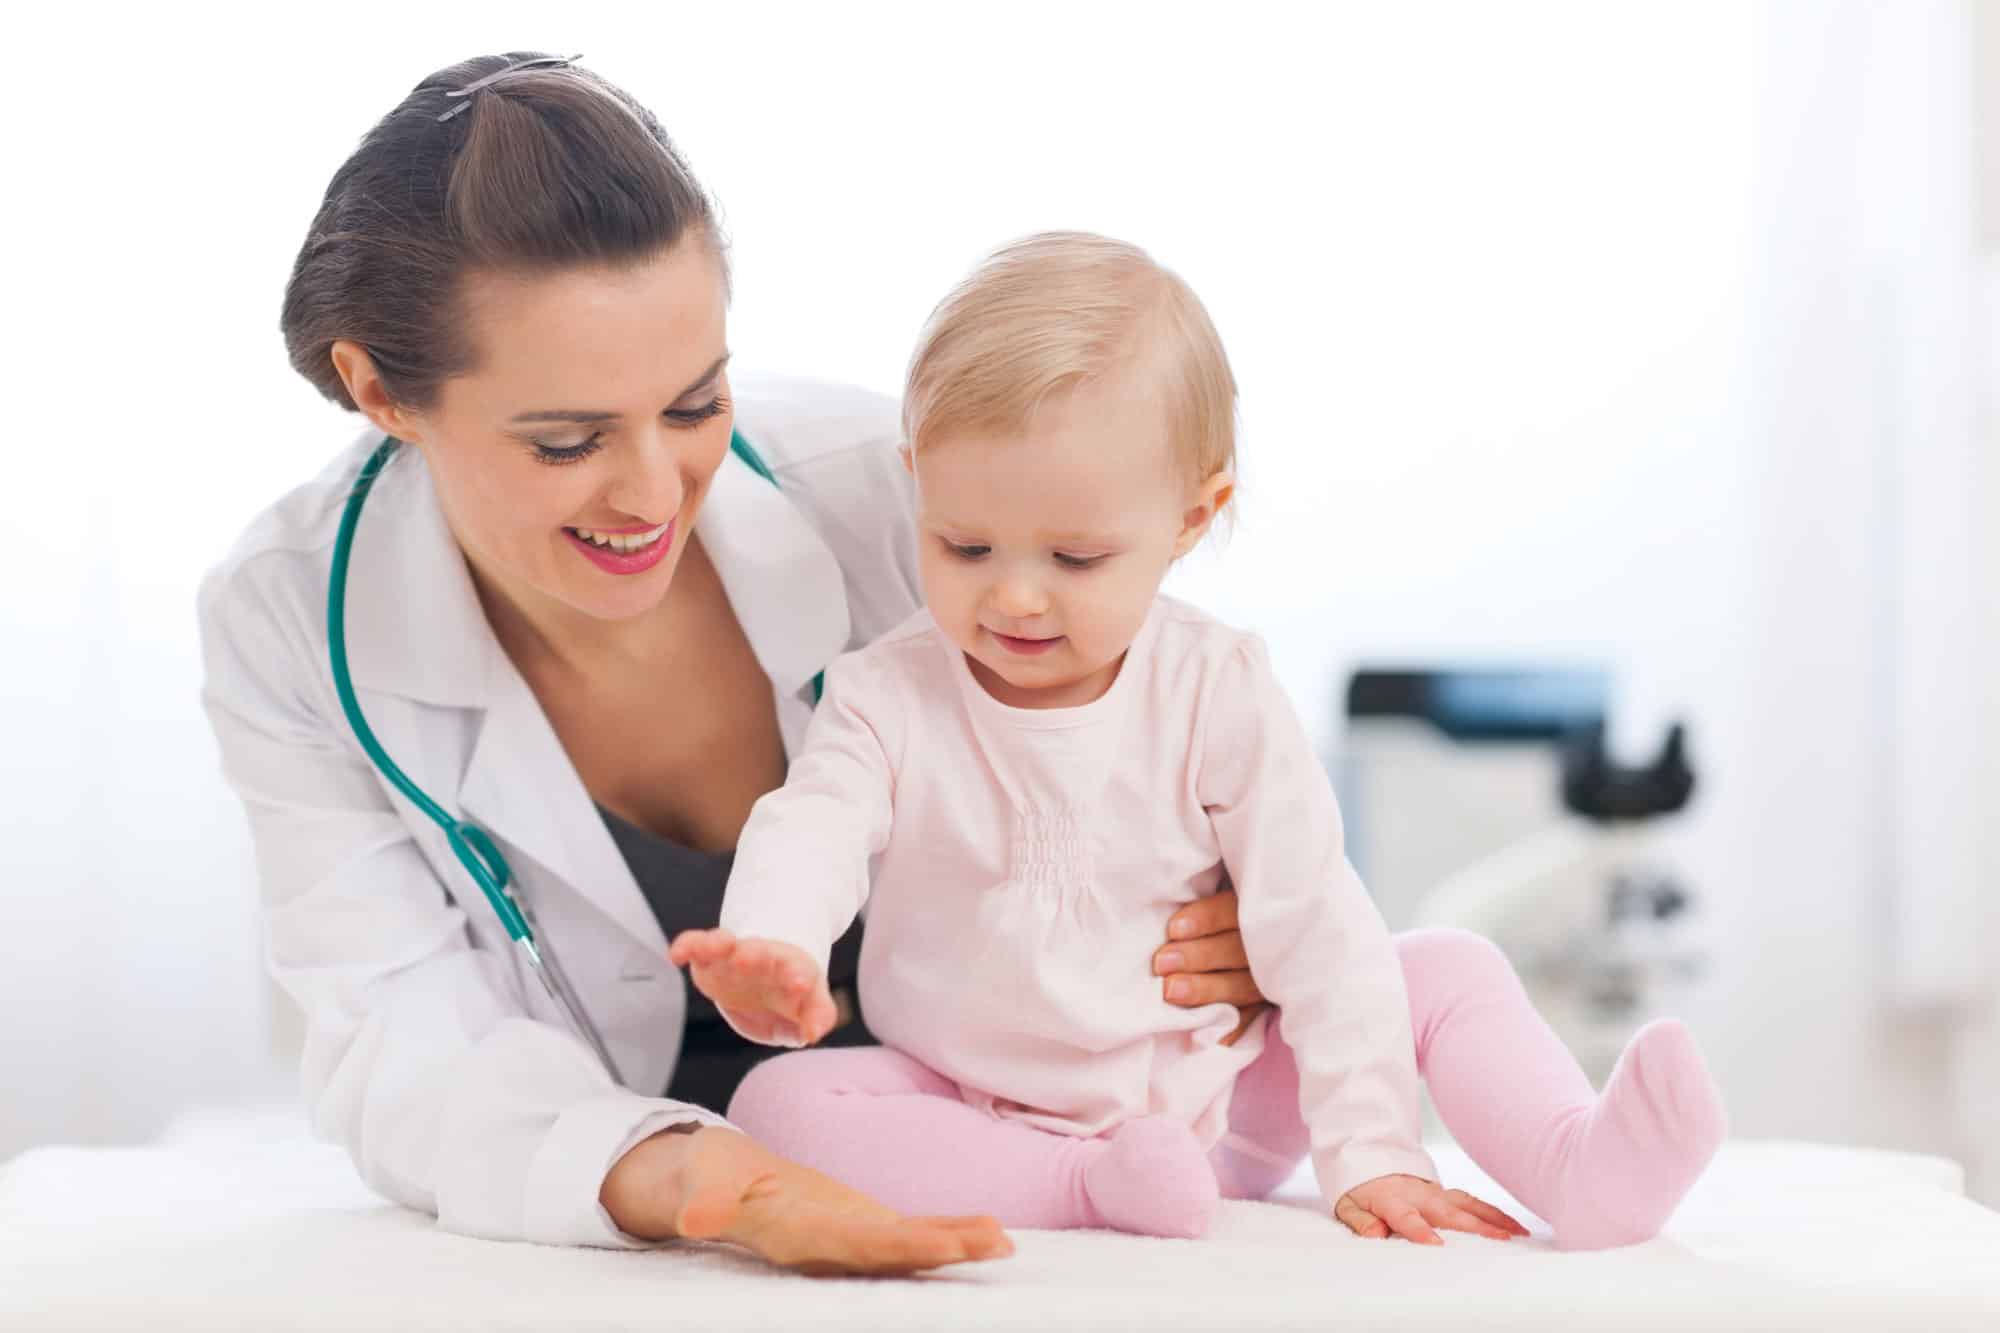 Cheerful-baby-high-five-to-pediatrician-doctor